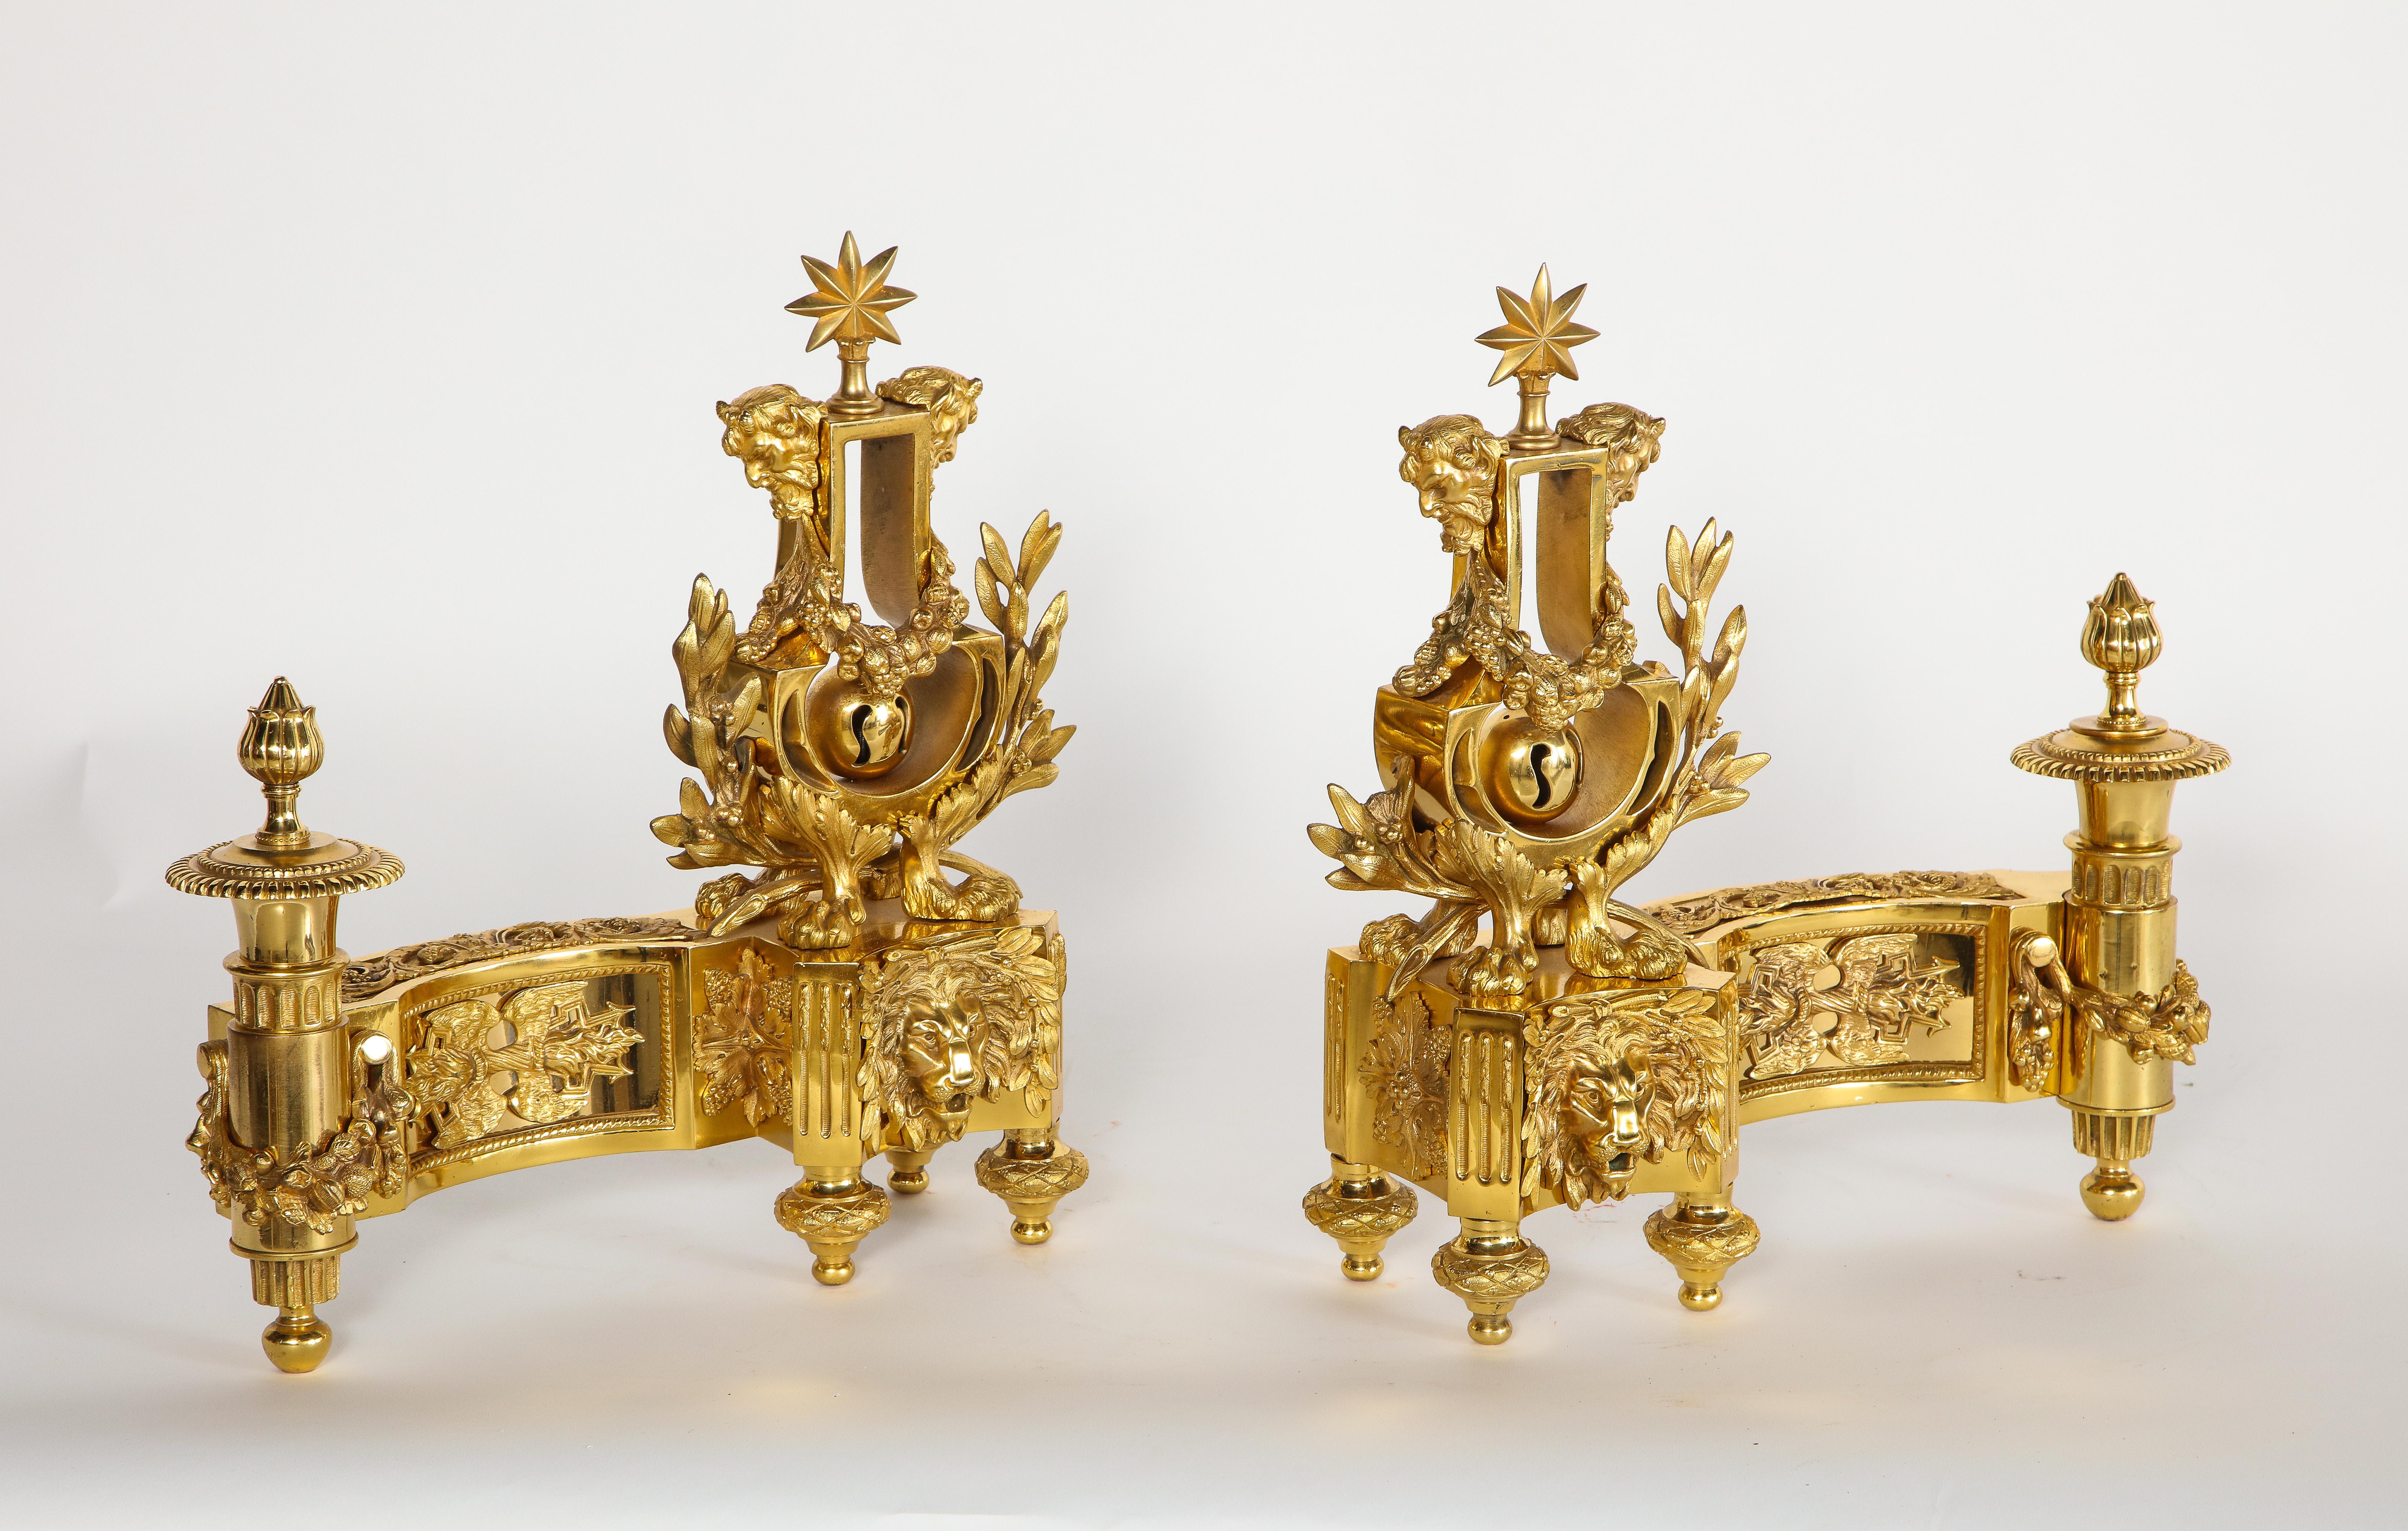 A fabulous pair of antique Louis XVI style French dore bronze lyre form Andirons/Chennets. Each is exceptionally cast, hand-chased, and chiseled with great precision and quality. The bases are decorated with multiple high relief dore bronze panels